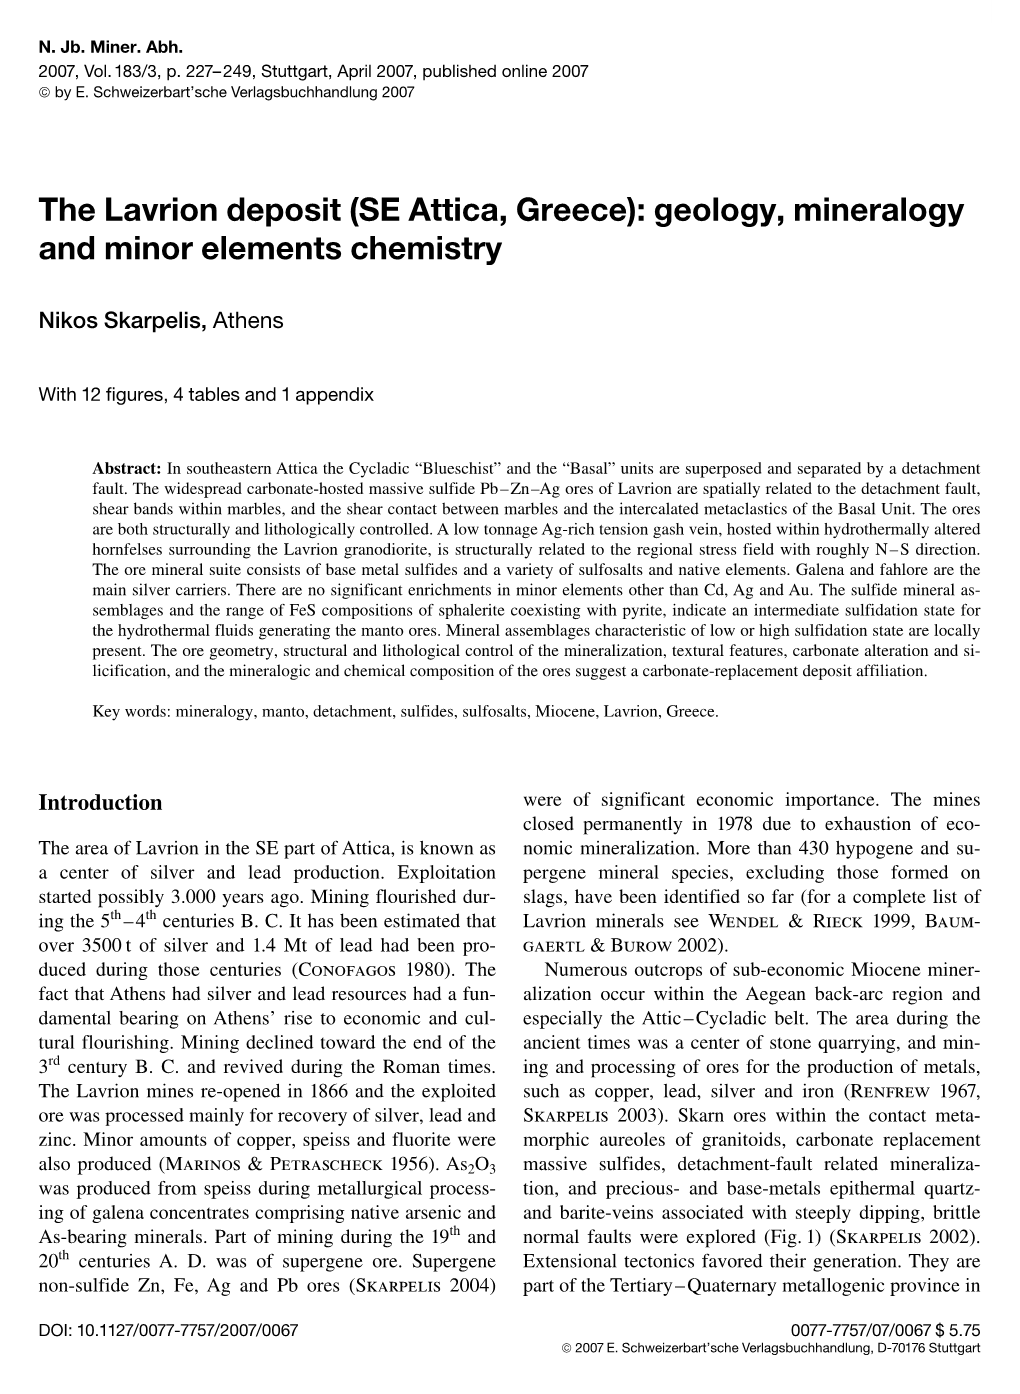 The Lavrion Deposit (SE Attica, Greece): Geology, Mineralogy and Minor Elements Chemistry